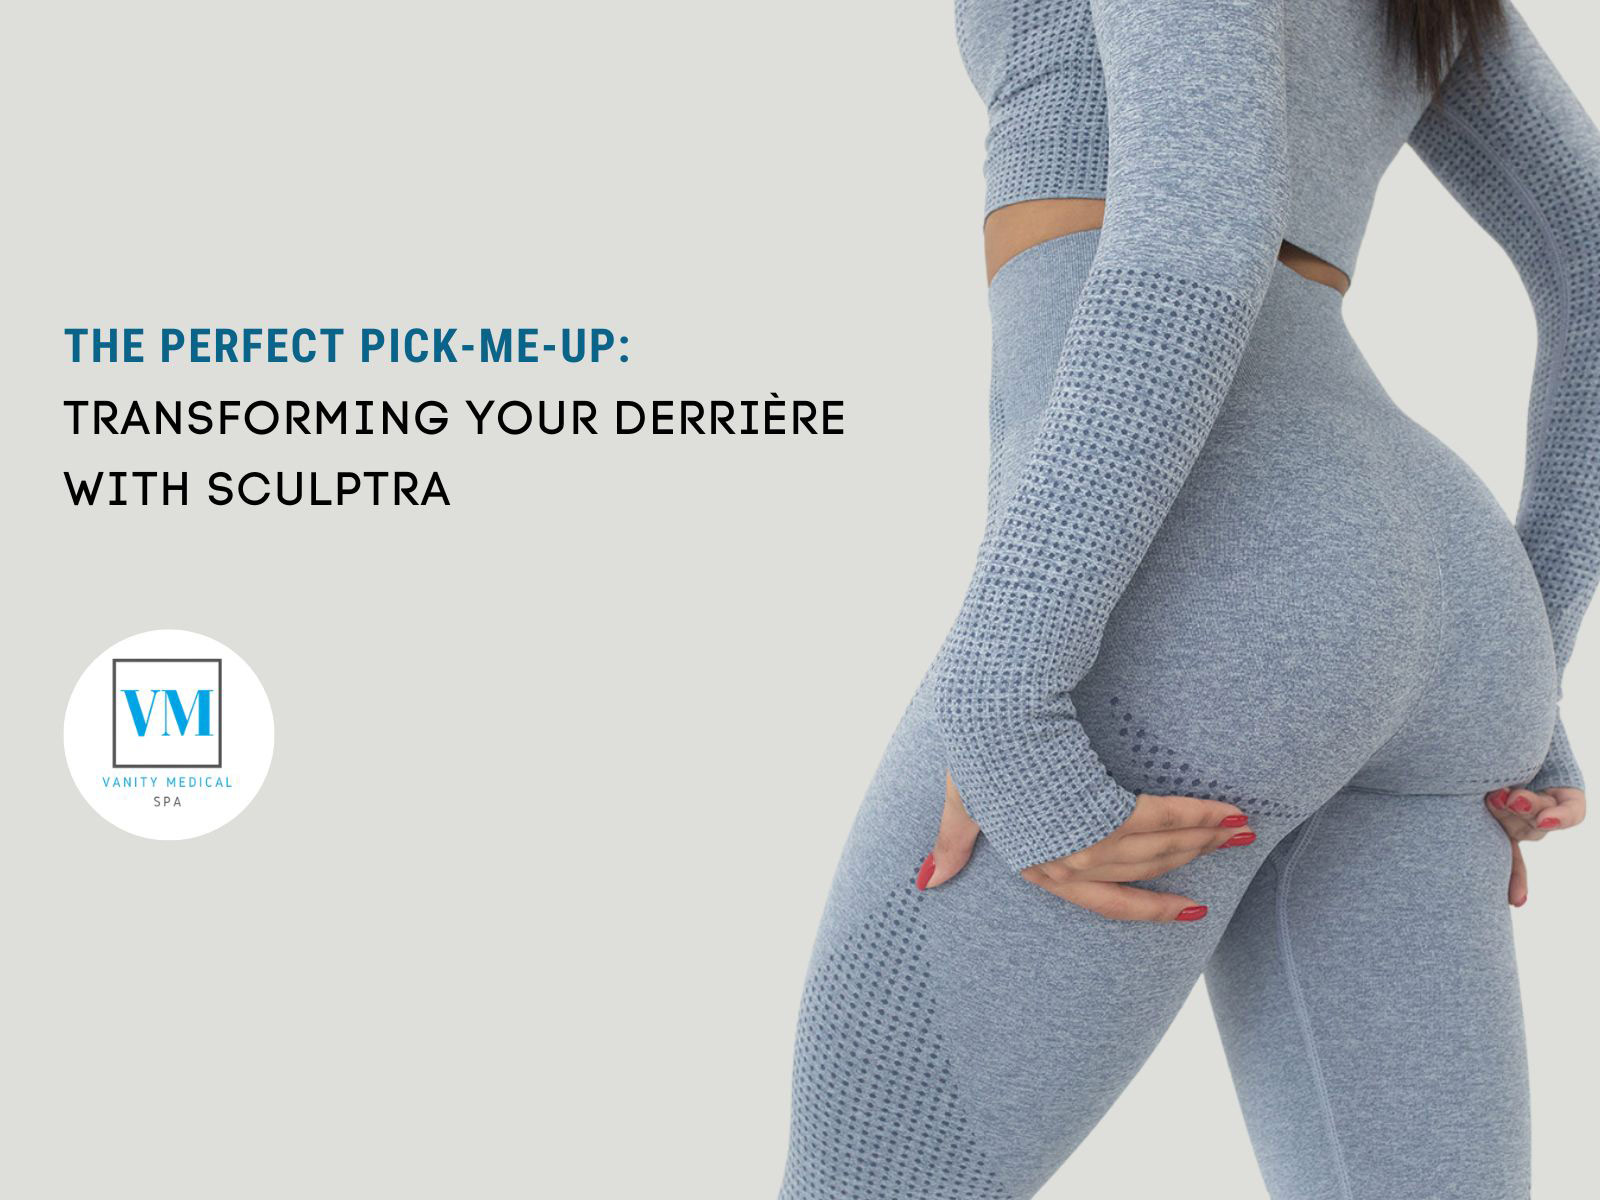 The Perfect Pick-Me-Up: Transforming Your Derrière with Sculptra